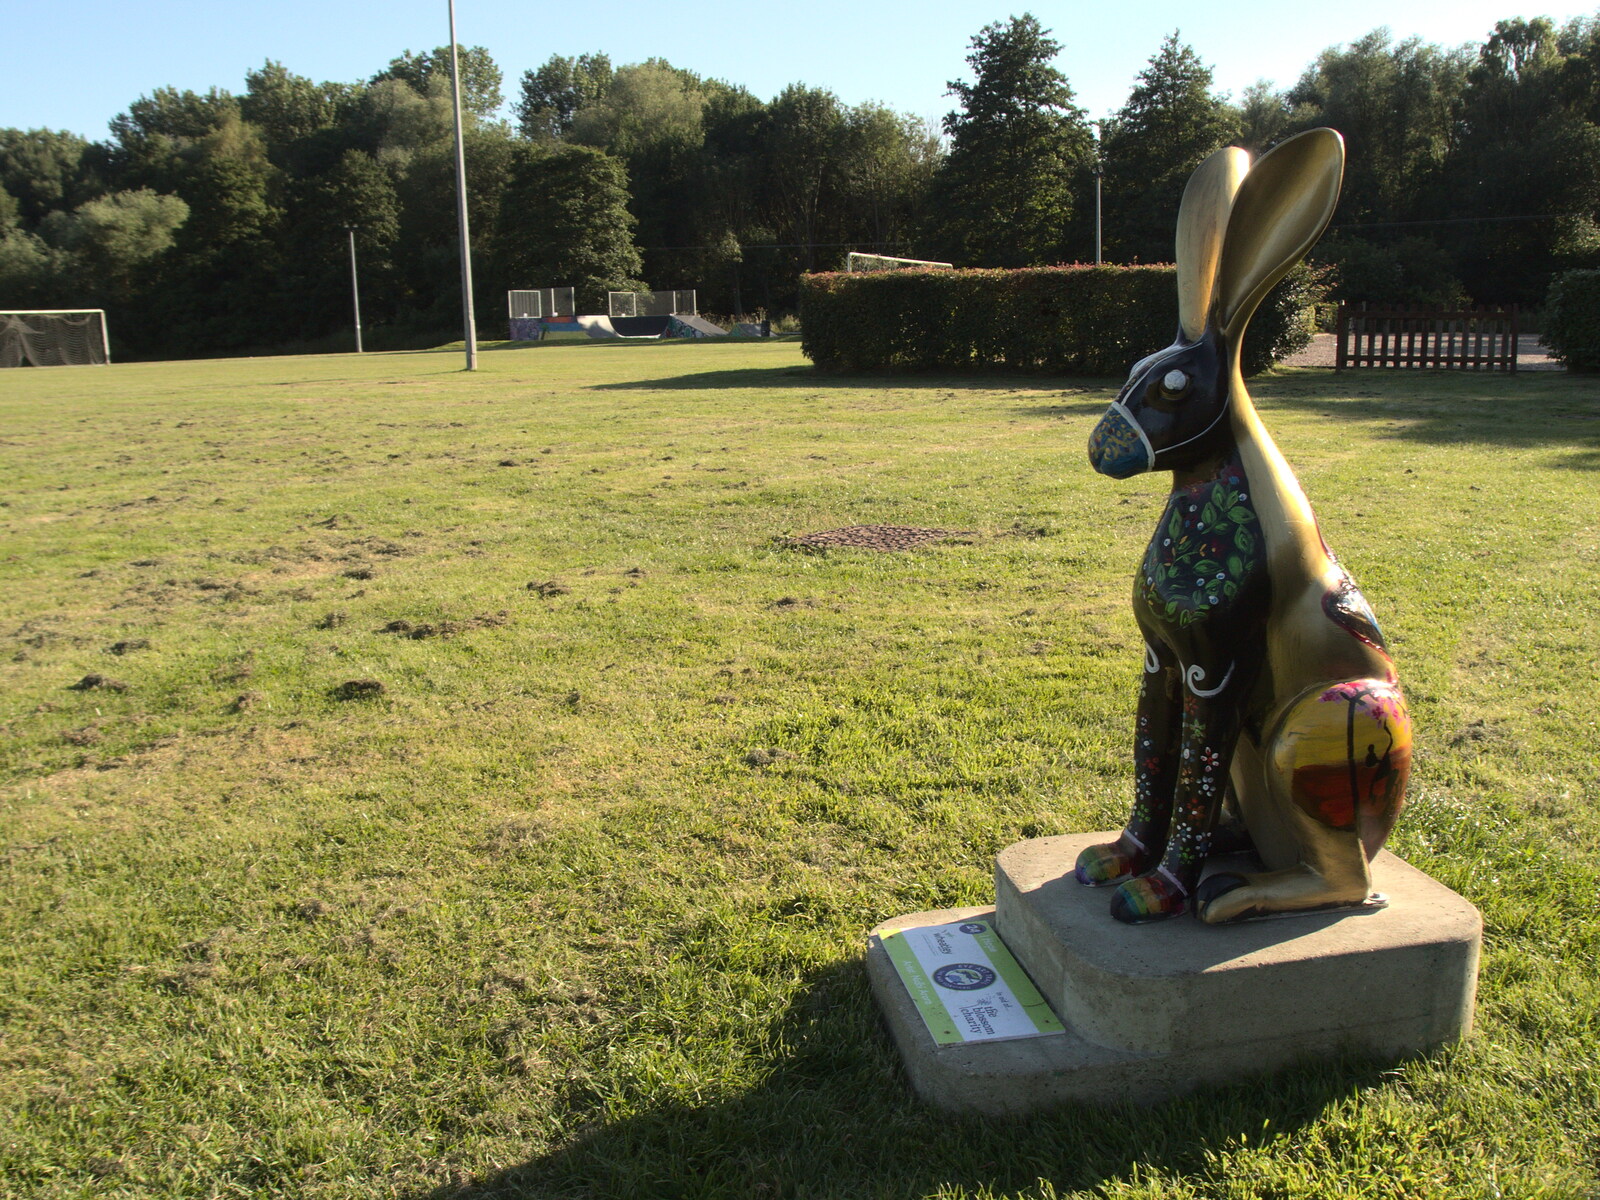 The golden hare on the playing fields from Hares, Tortoises and Station 119, Eye, Suffolk - 19th July 2021